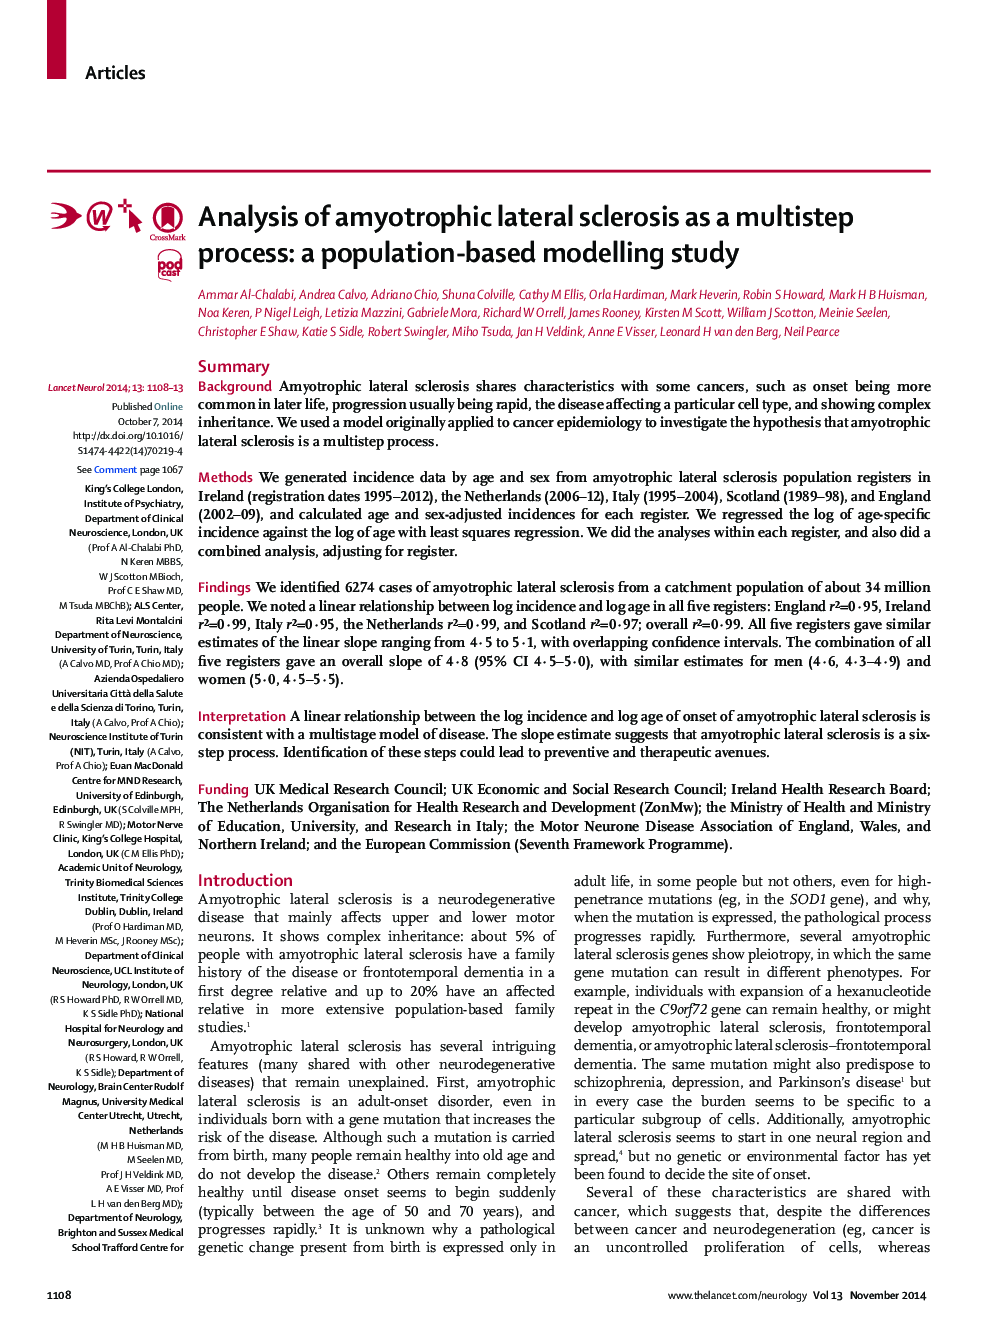 Analysis of amyotrophic lateral sclerosis as a multistep process: a population-based modelling study